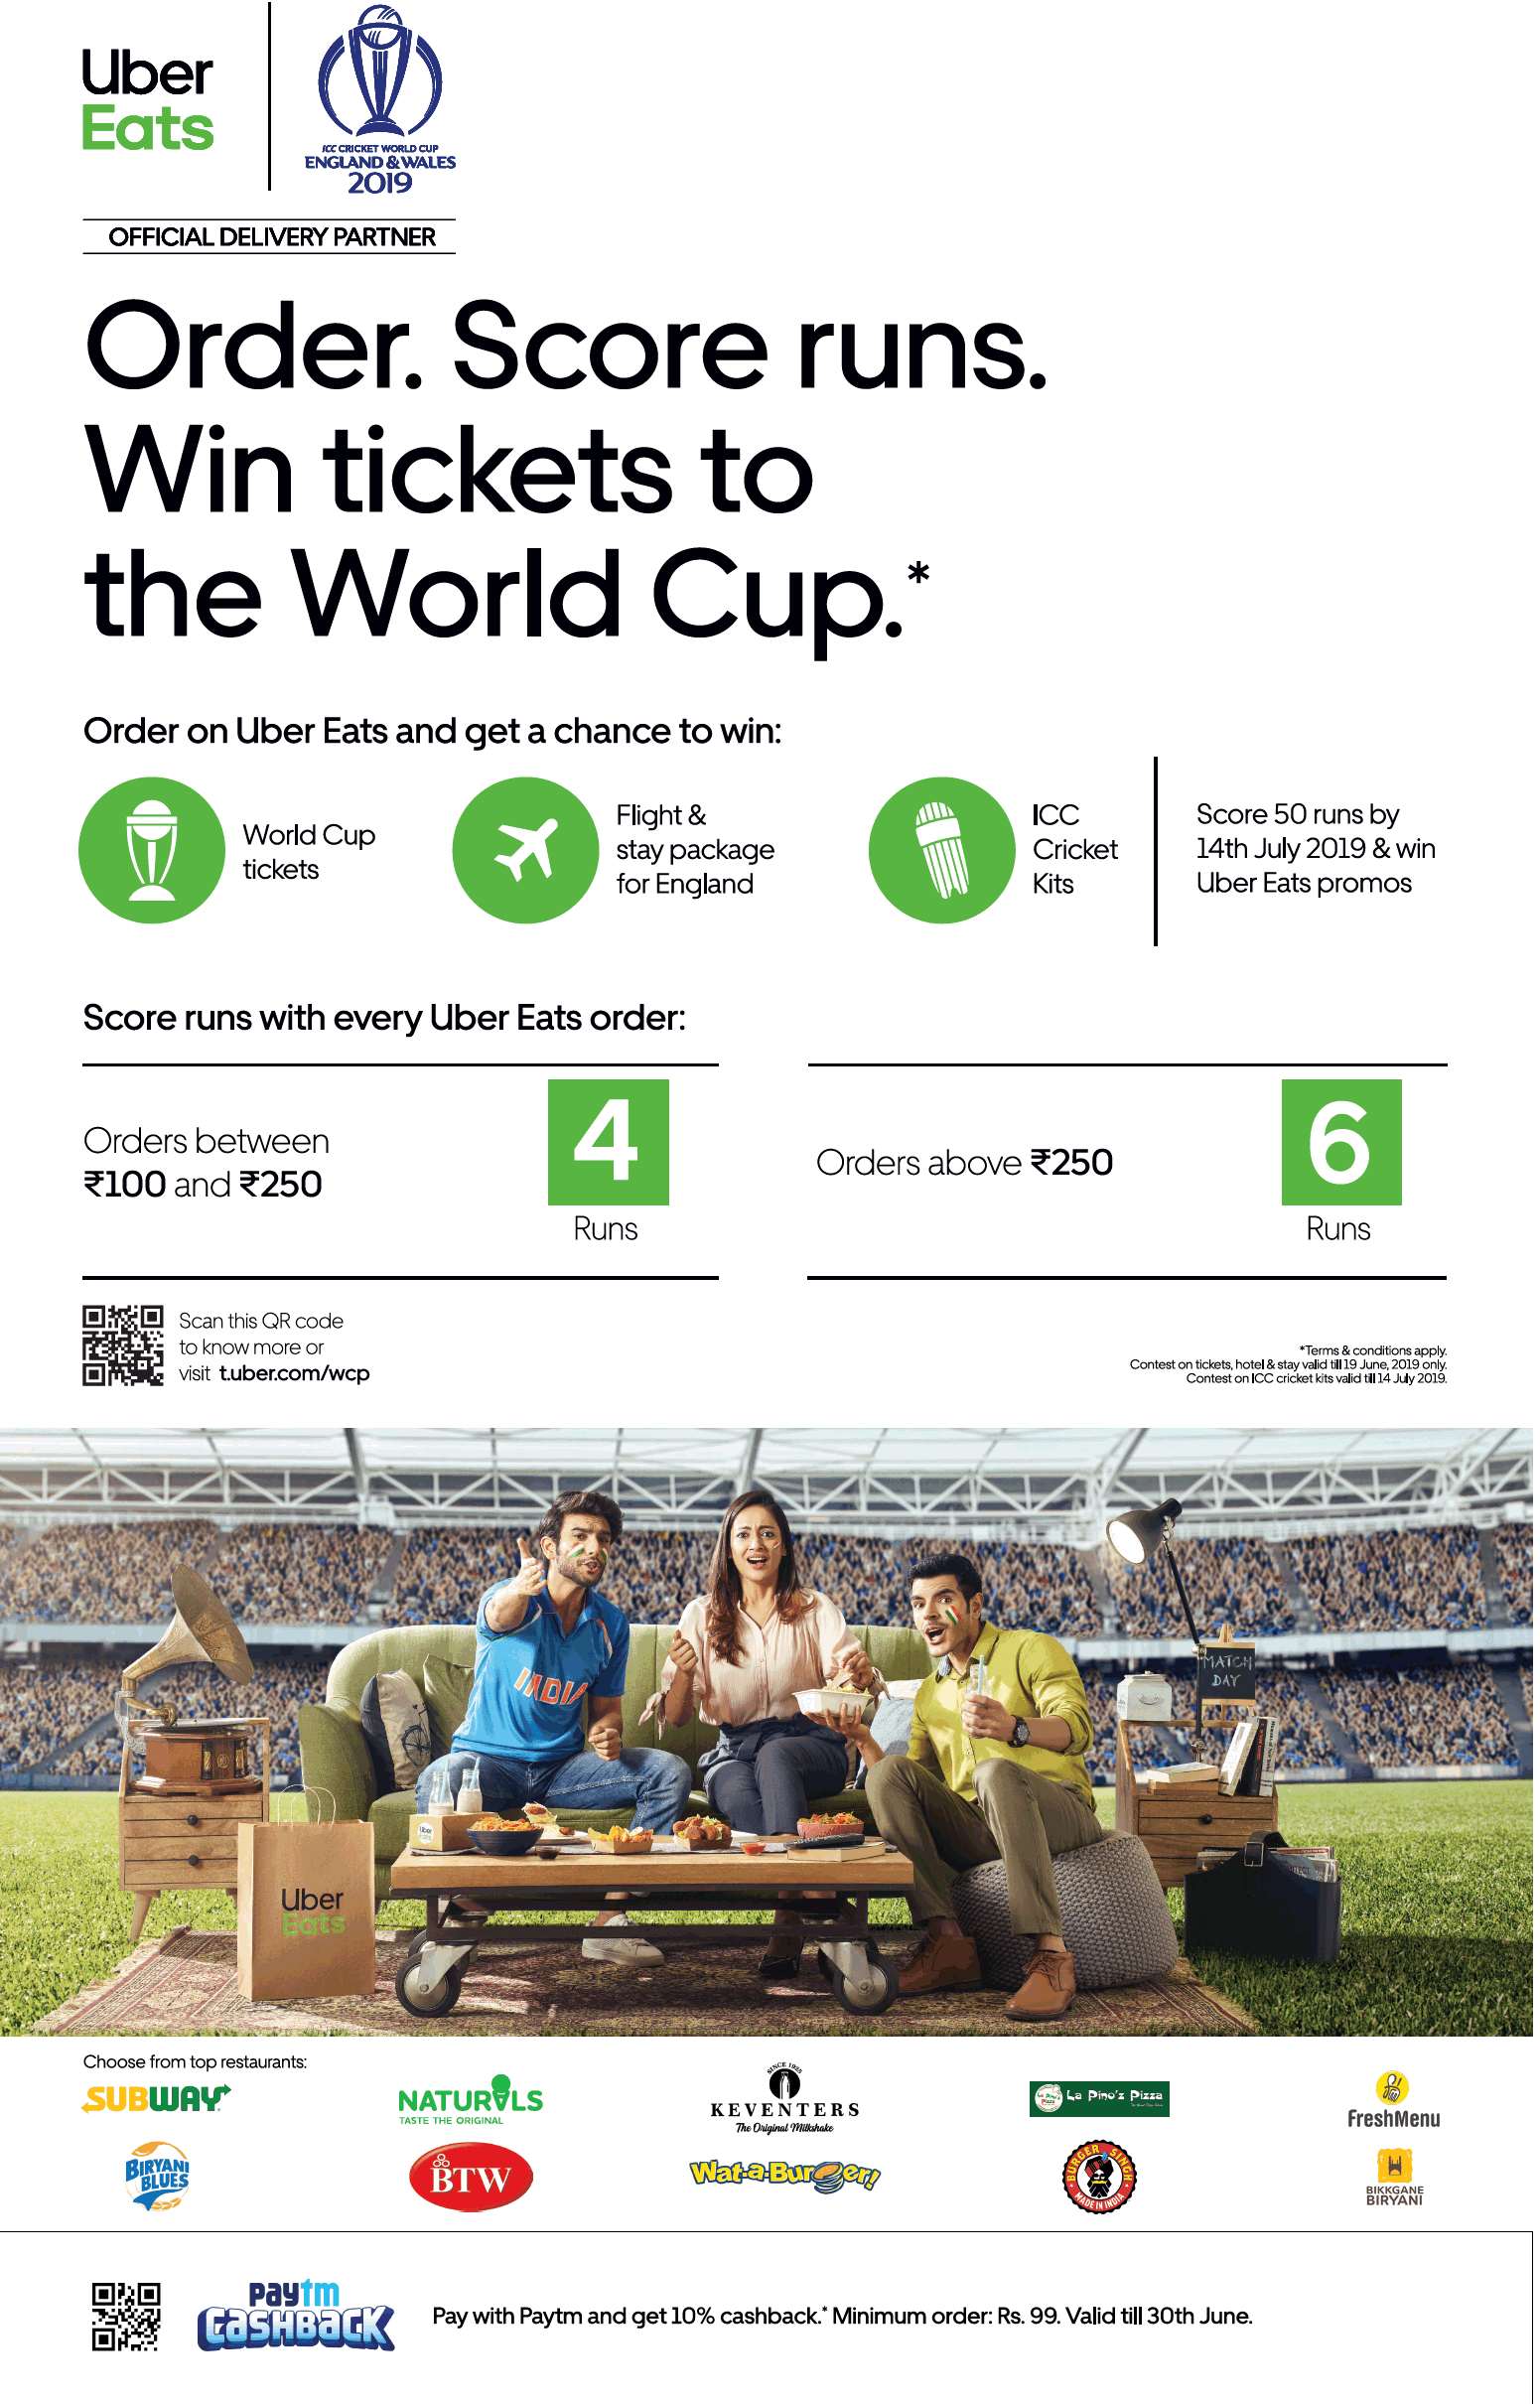 uber-eats-order-score-runs-win-tickets-to-world-cup-ad-times-of-india-delhi-30-05-2019.png